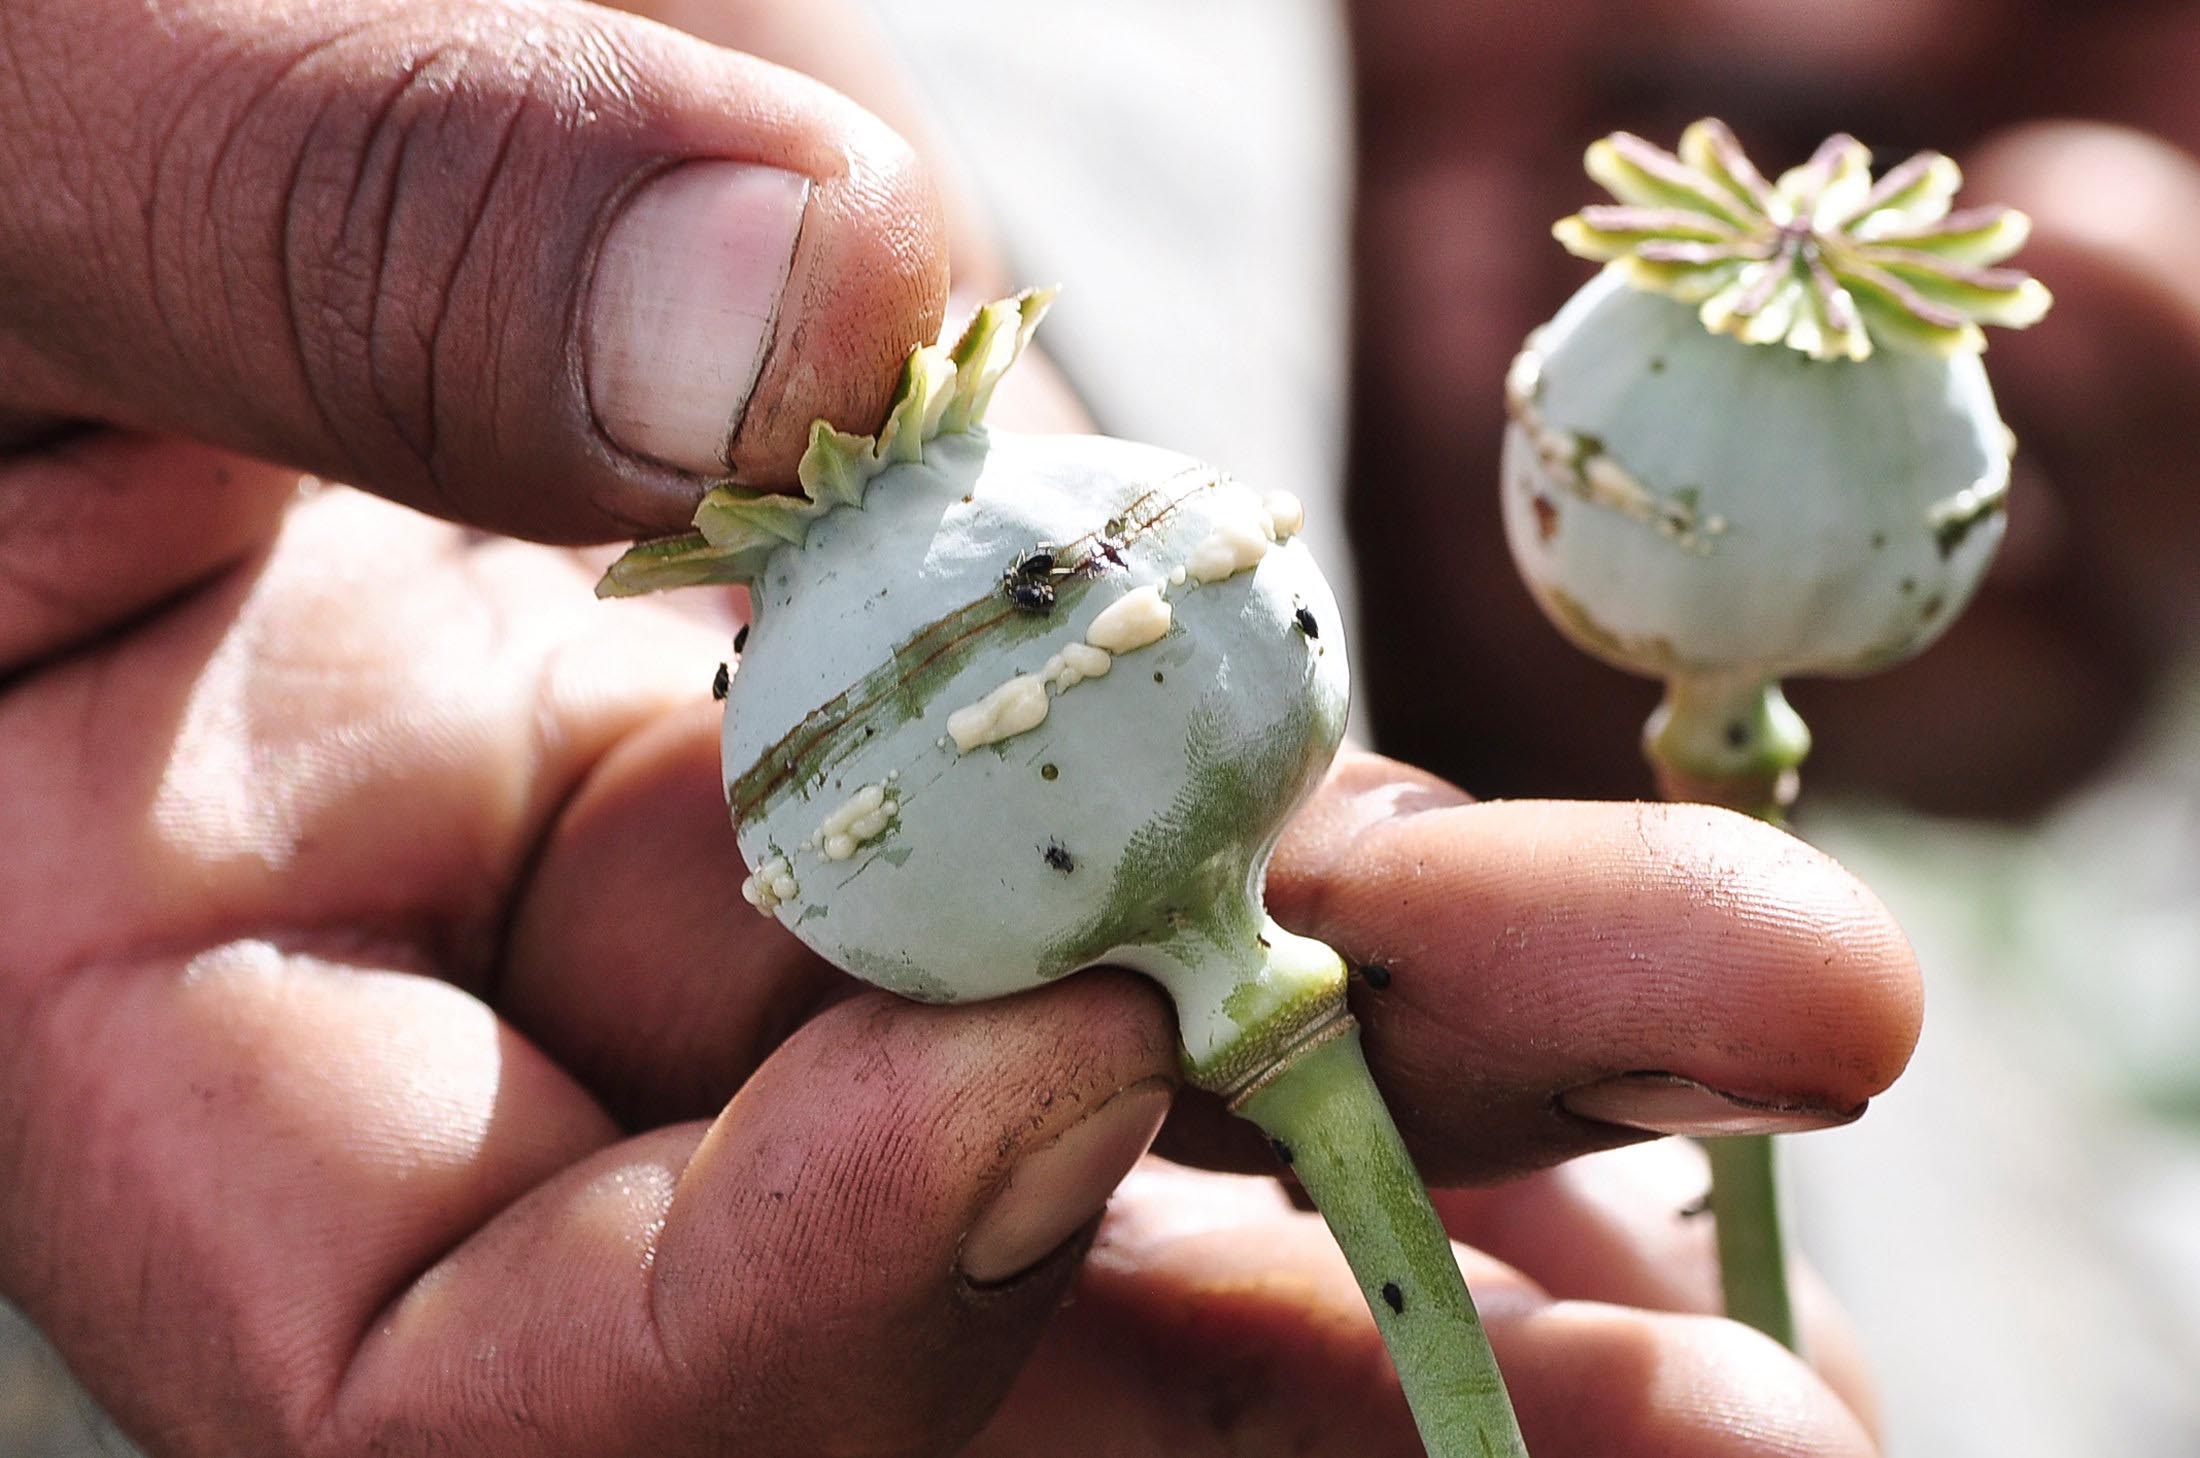 A man holds a lanced poppy bulb to show how to extract the sap, which will be used to make opium, at a field in the municipality of Heliodoro Castillo, in the mountain region of the state of Guerrero, Mexico, on January 3, 2015. Photo: Reuters/File